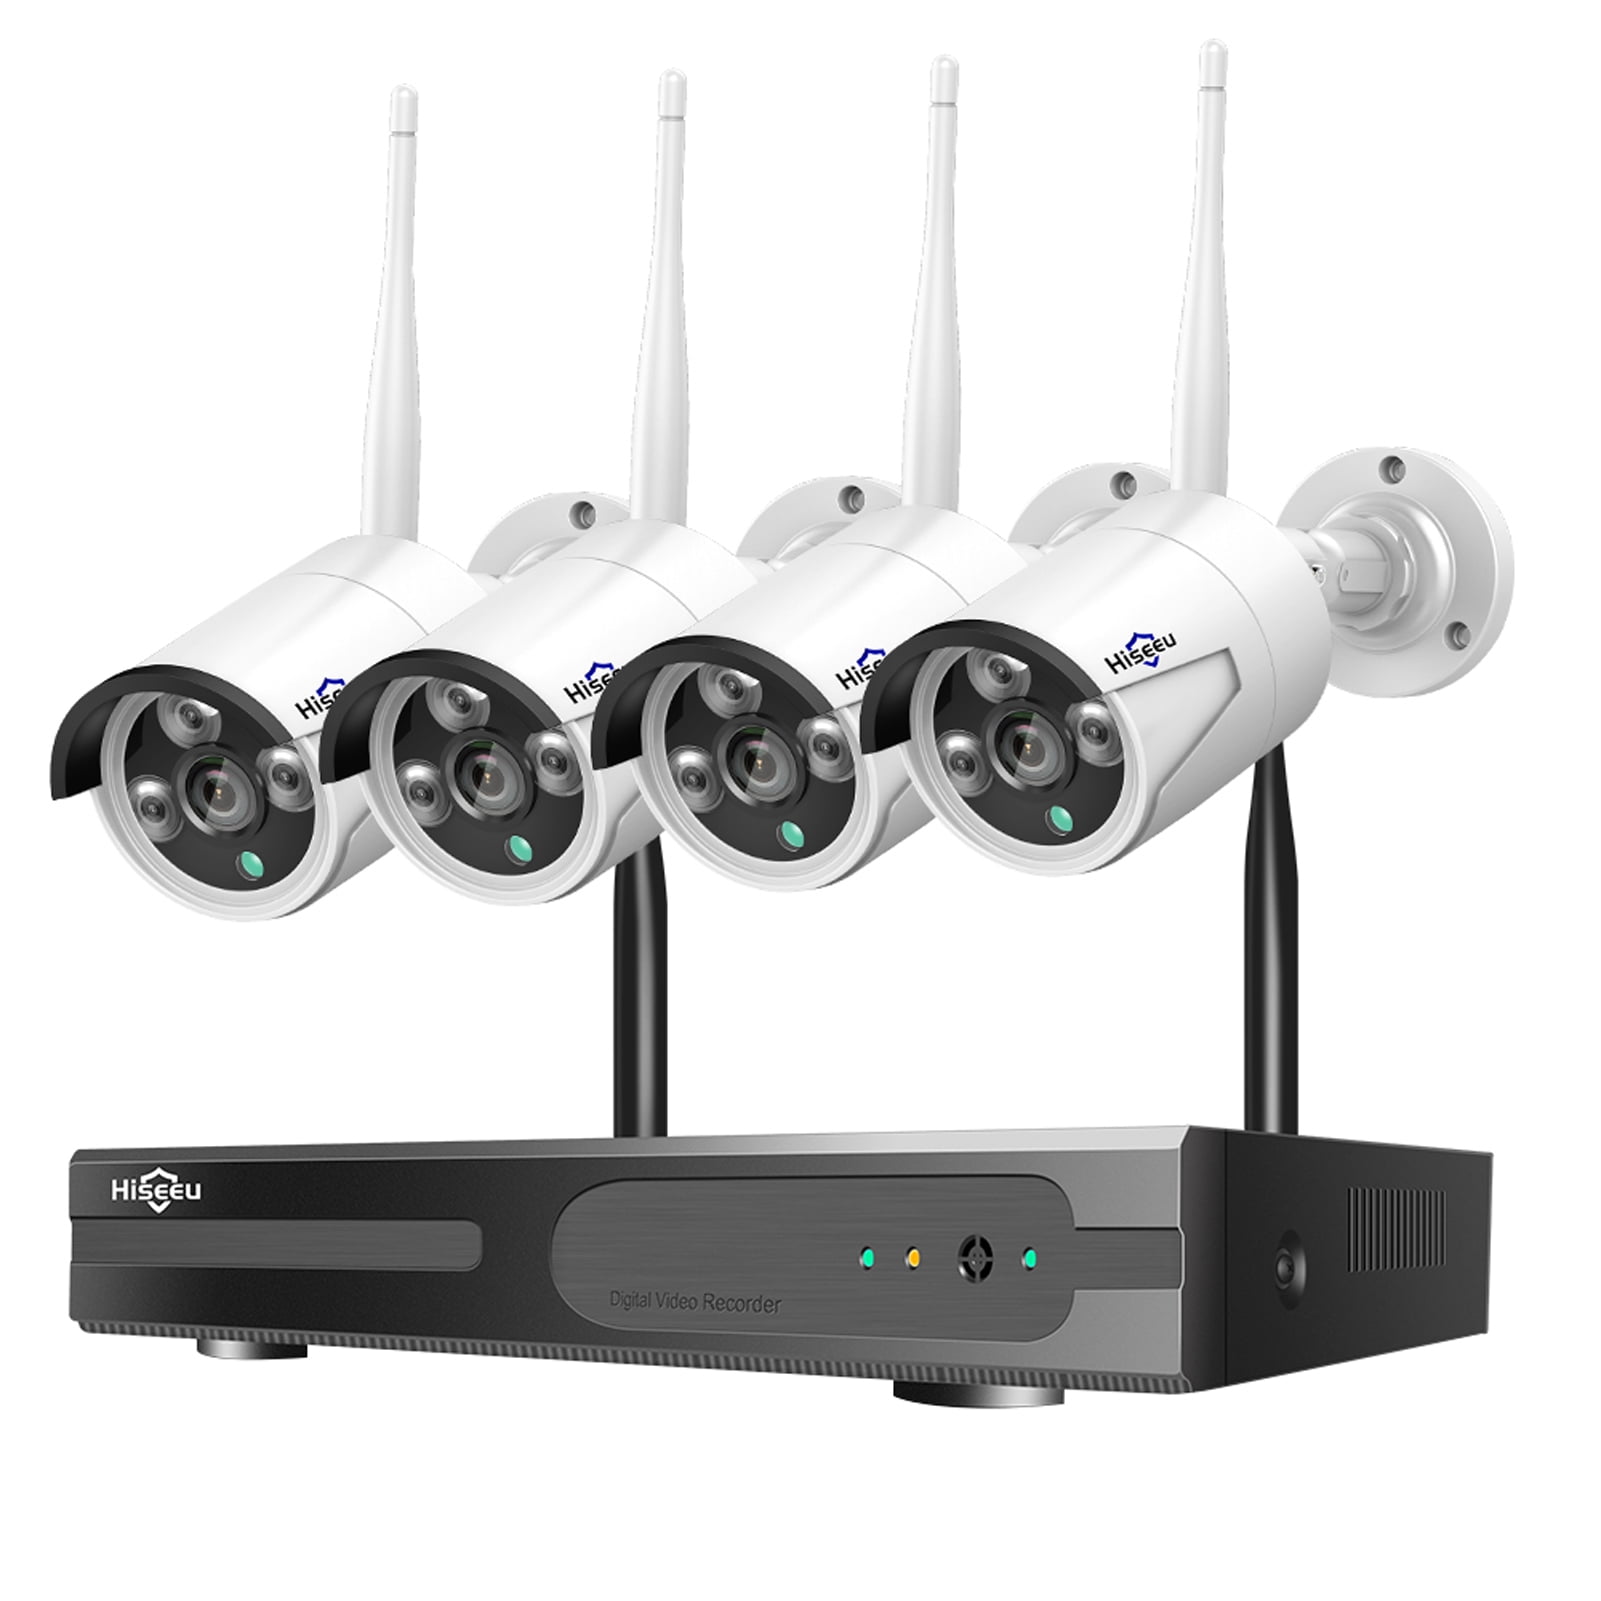 in/Outdoor Wireless WiFi Waterpoof Camera Anssipo 3MP Home Security Camera System with 4pcs Surveillance Waterproof Cameras 8CH NVR Video System 1TB HDD for 24/7 Audio Recording 